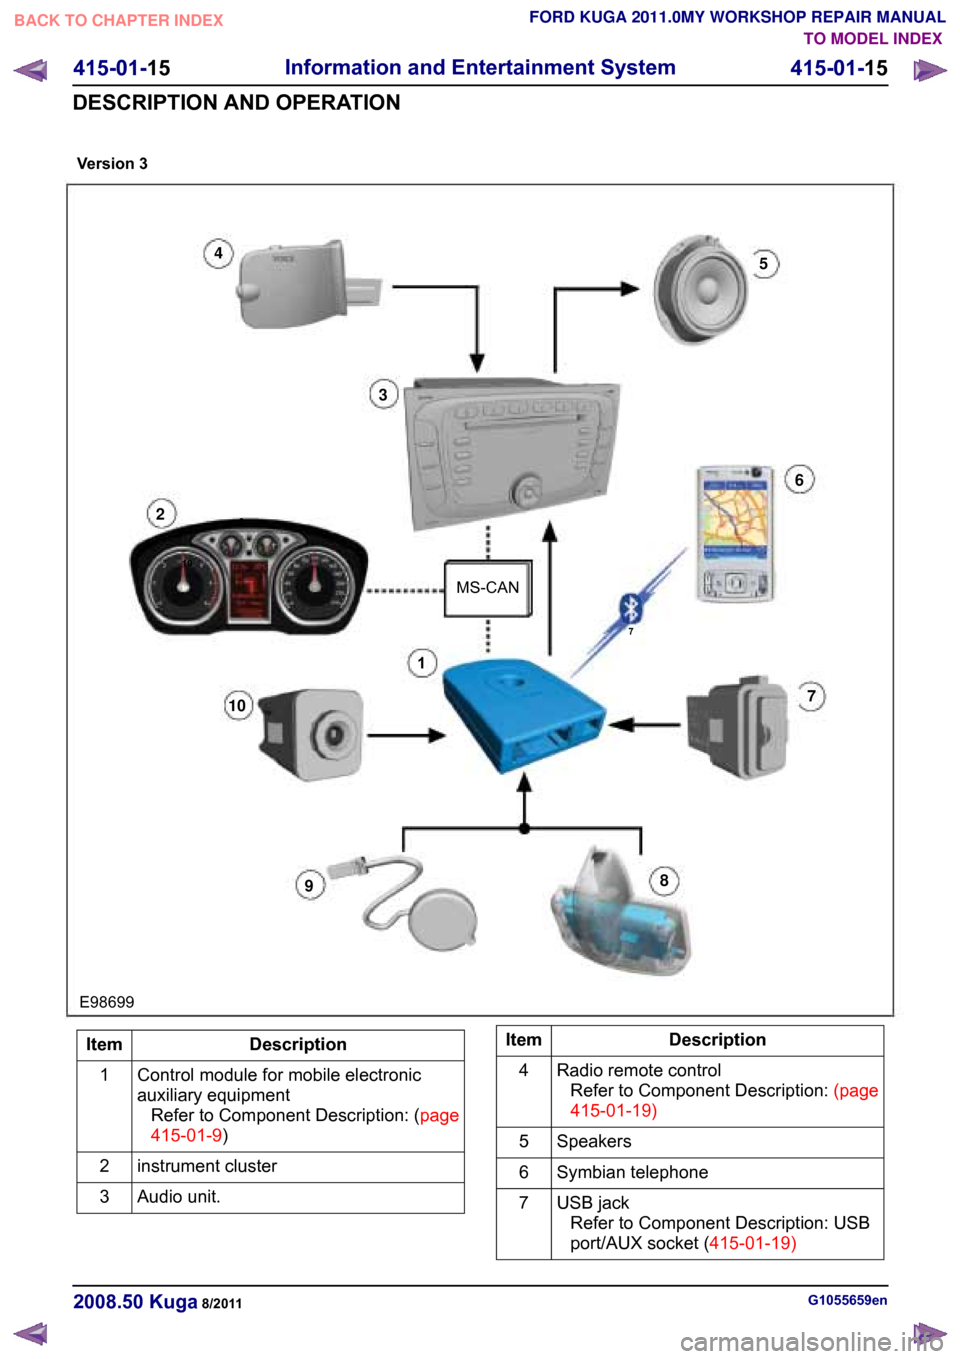 FORD KUGA 2011 1.G User Guide TO MODEL INDEX
BACK TO CHAPTER INDEX
FORD KUGA 2011.0MY WORKSHOP REPAIR MANUAL
415-01-19
 Description
Item
Control module for mobile electronic
auxiliary equipmentRefertoComponentDescription:(page
415